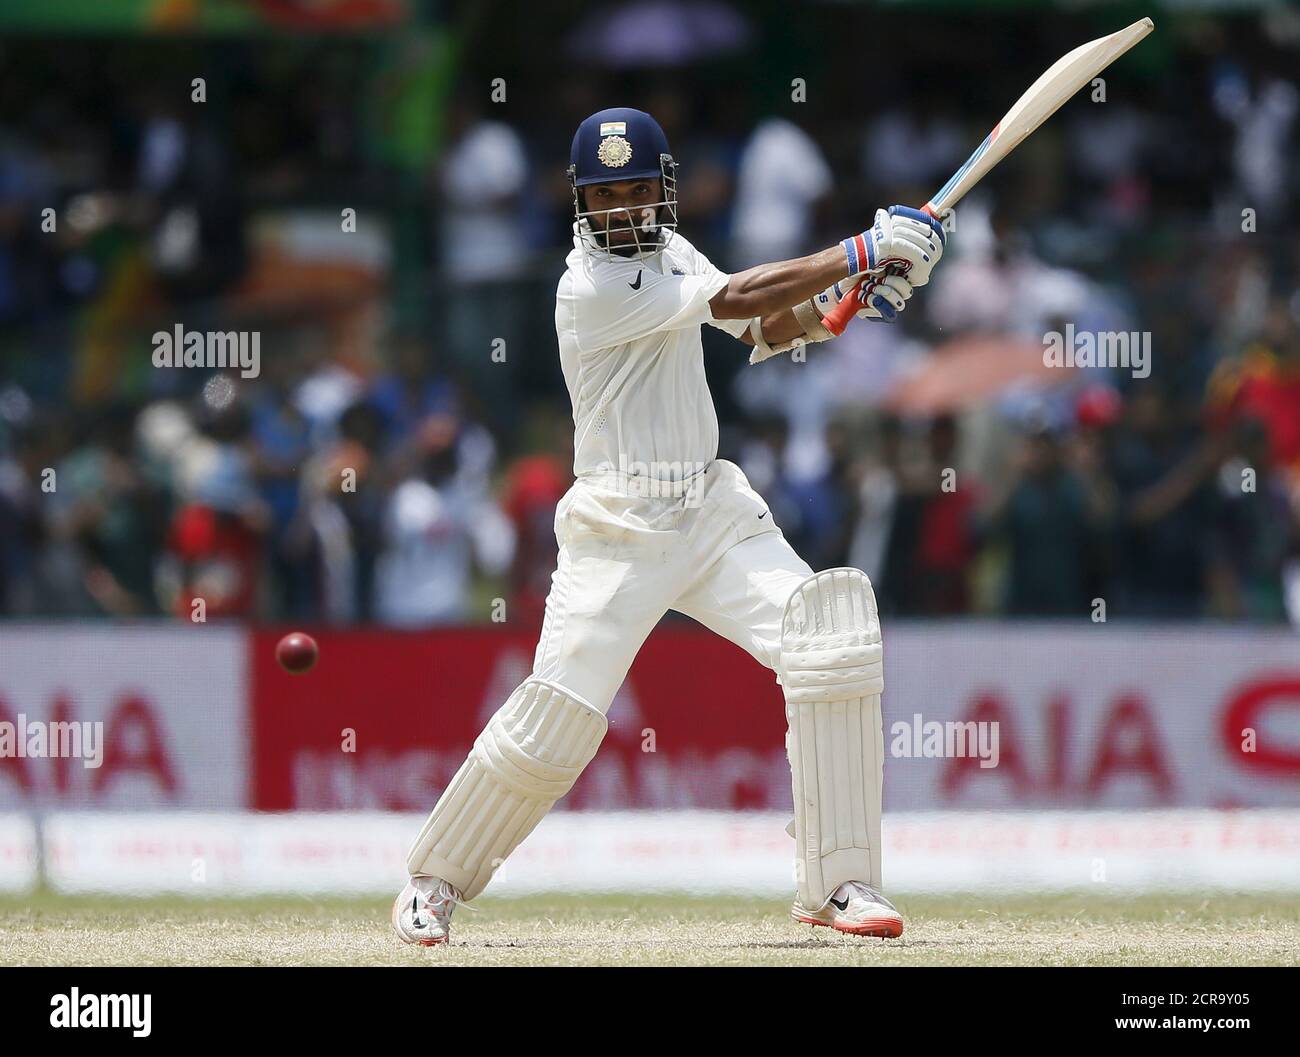 India's Ajinkya Rahane hits a boundary during the fourth day of their second test cricket match against Sri Lanka in Colombo August 23, 2015. REUTERS/Dinuka Liyanawatte Stock Photo